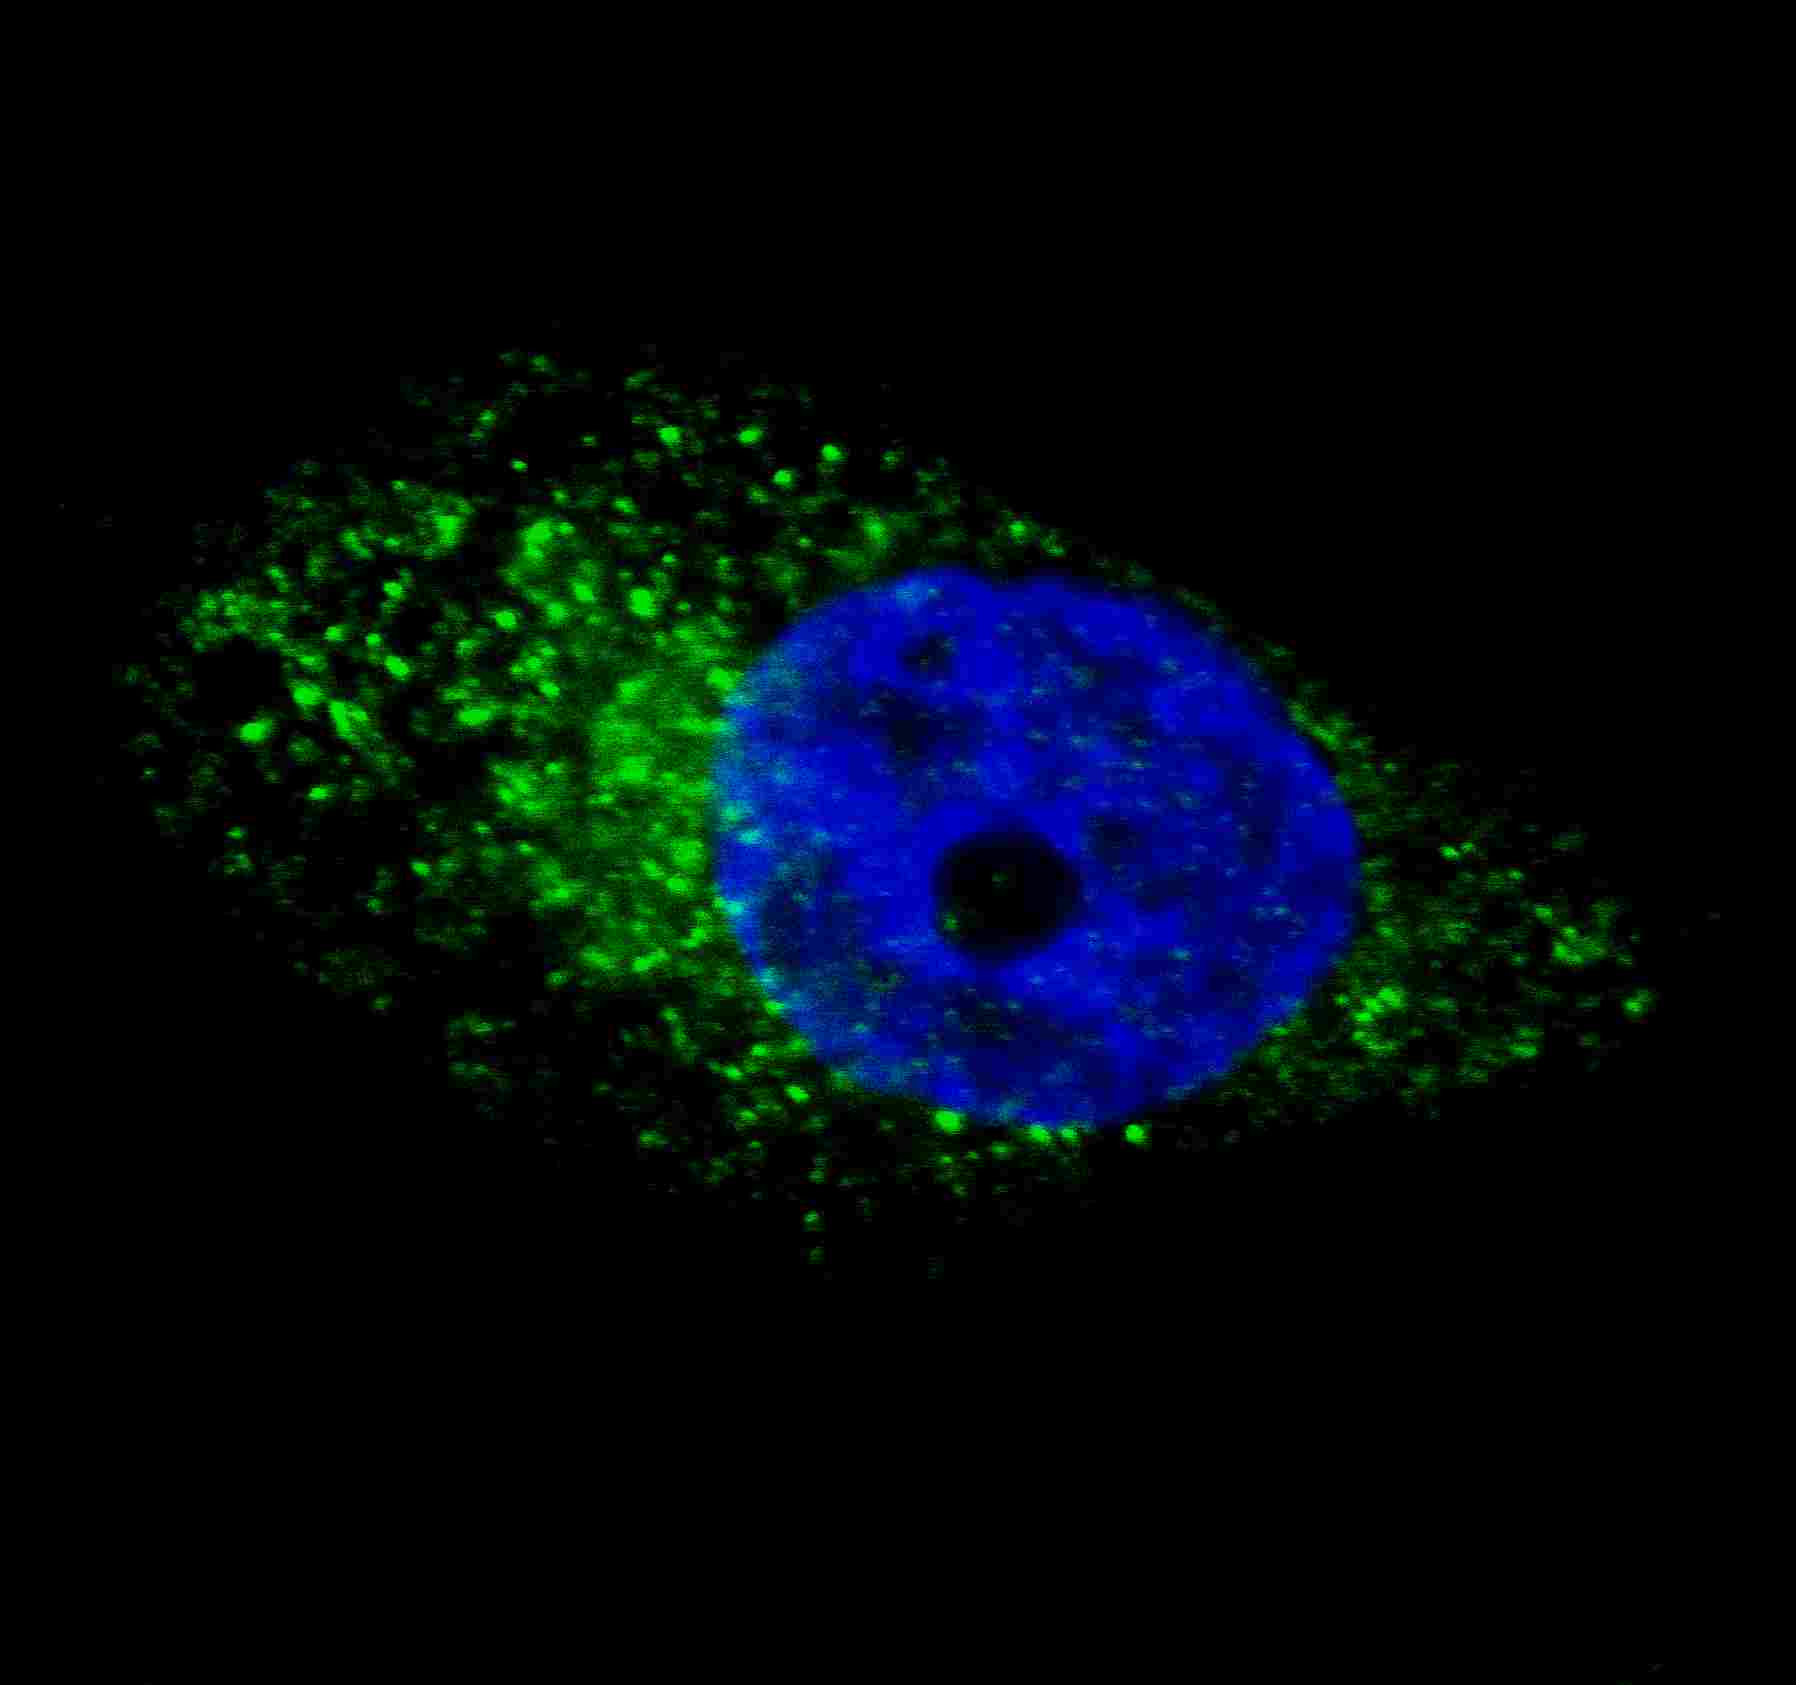 Fluorescent image of U251 cells stained with ATG16L antibody. U251 cells were treated with Chloroquine (50 ?M,16h), then fixed with 4% PFA (20 min), permeabilized with Triton X-100 (0.2%, 30 min). Cells were then incubated with AP1817d ATG16L primary antibody (1:100, 2 h at room temperature). For secondary antibody, Alexa Fluor� 488 conjugated donkey anti-rabbit antibody (green) was used (1:1000, 1h). Nuclei were counterstained with Hoechst 33342 (blue) (10 ?g/ml, 5 min). ATG16L immunoreactivity is localized to autophagic vacuoles in the cytoplasm of U251 cells, supported by Human Protein Atlas Data (http://www.proteinatlas.org/ENSG00000085978).